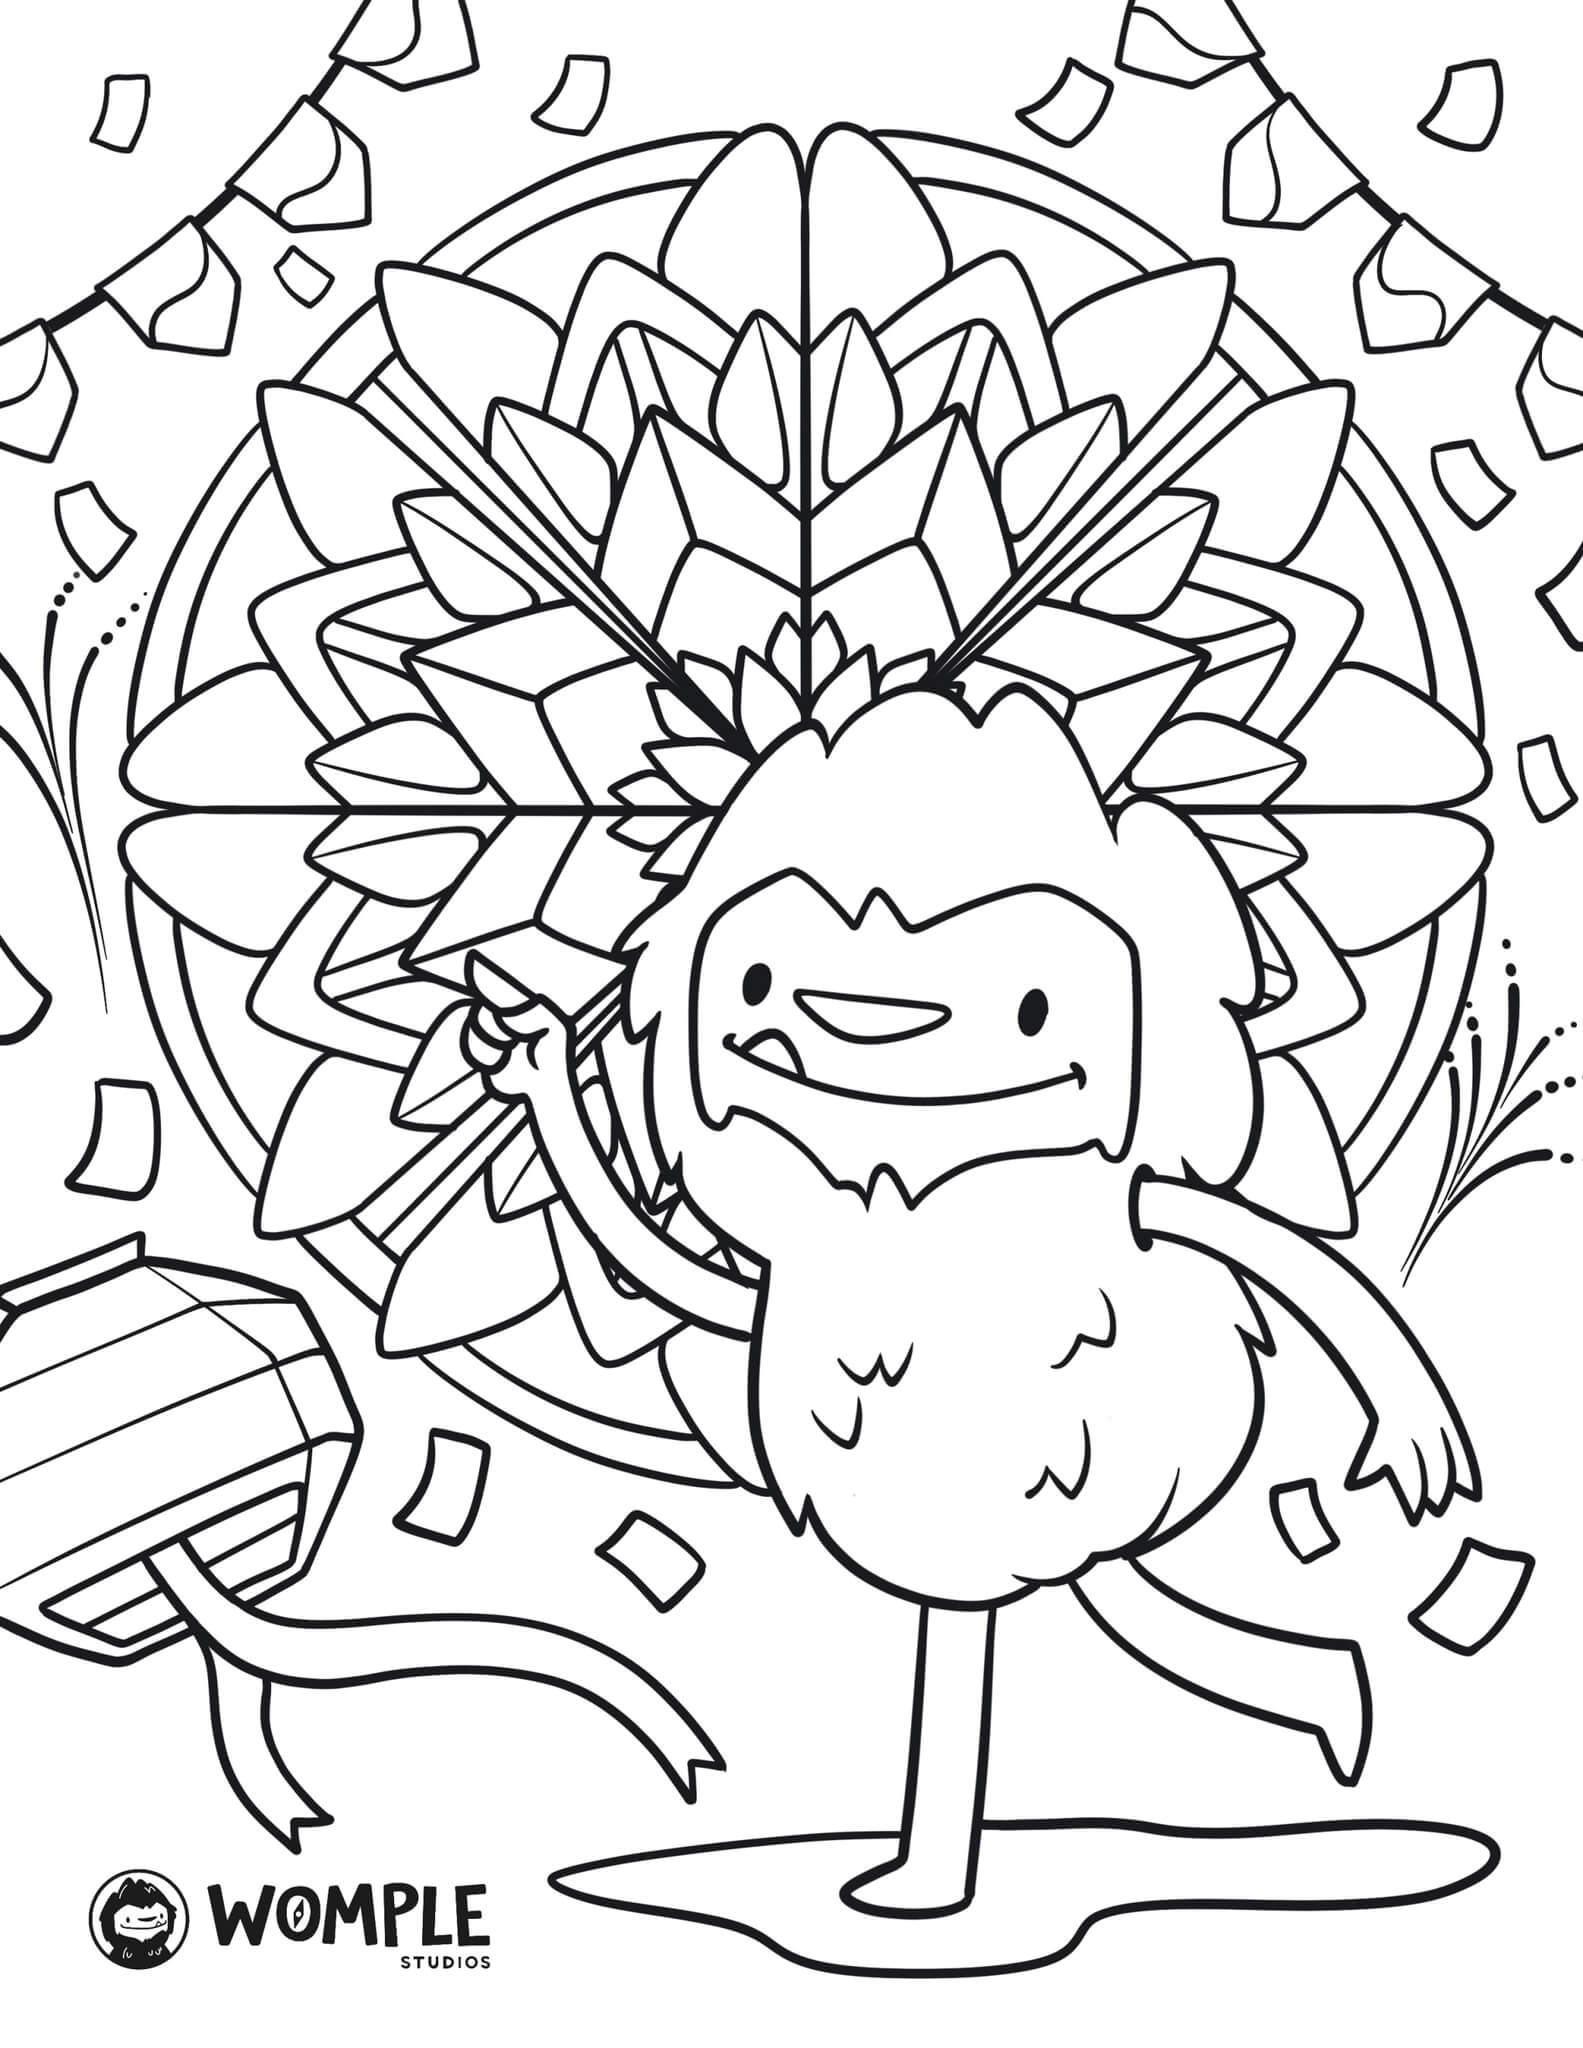 Womple decorating a Christmas Parol (Philippines) Coloring Page